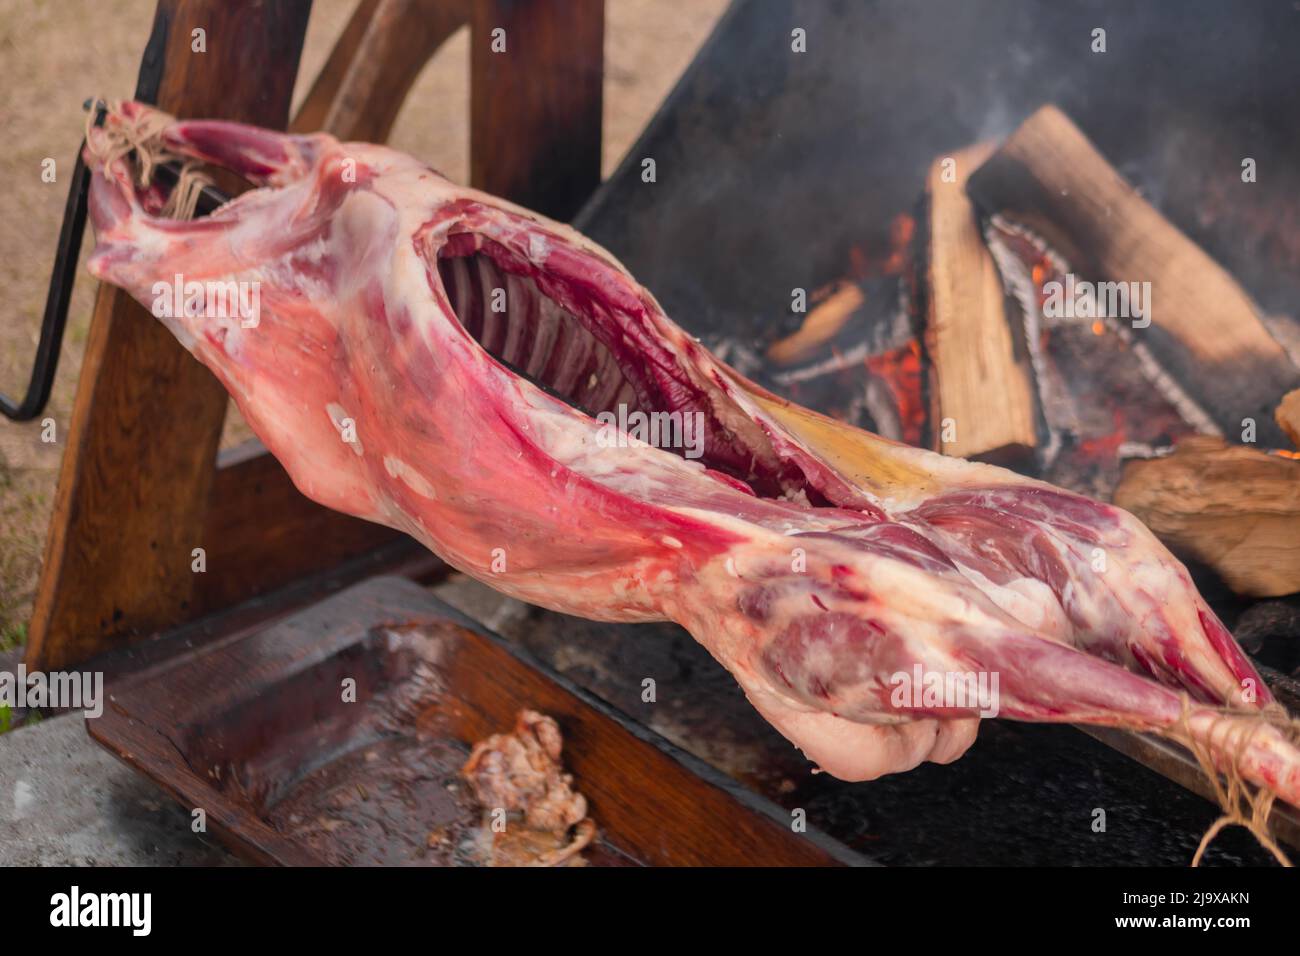 Process of cooking pork carcass on spit at summer street food market Stock Photo